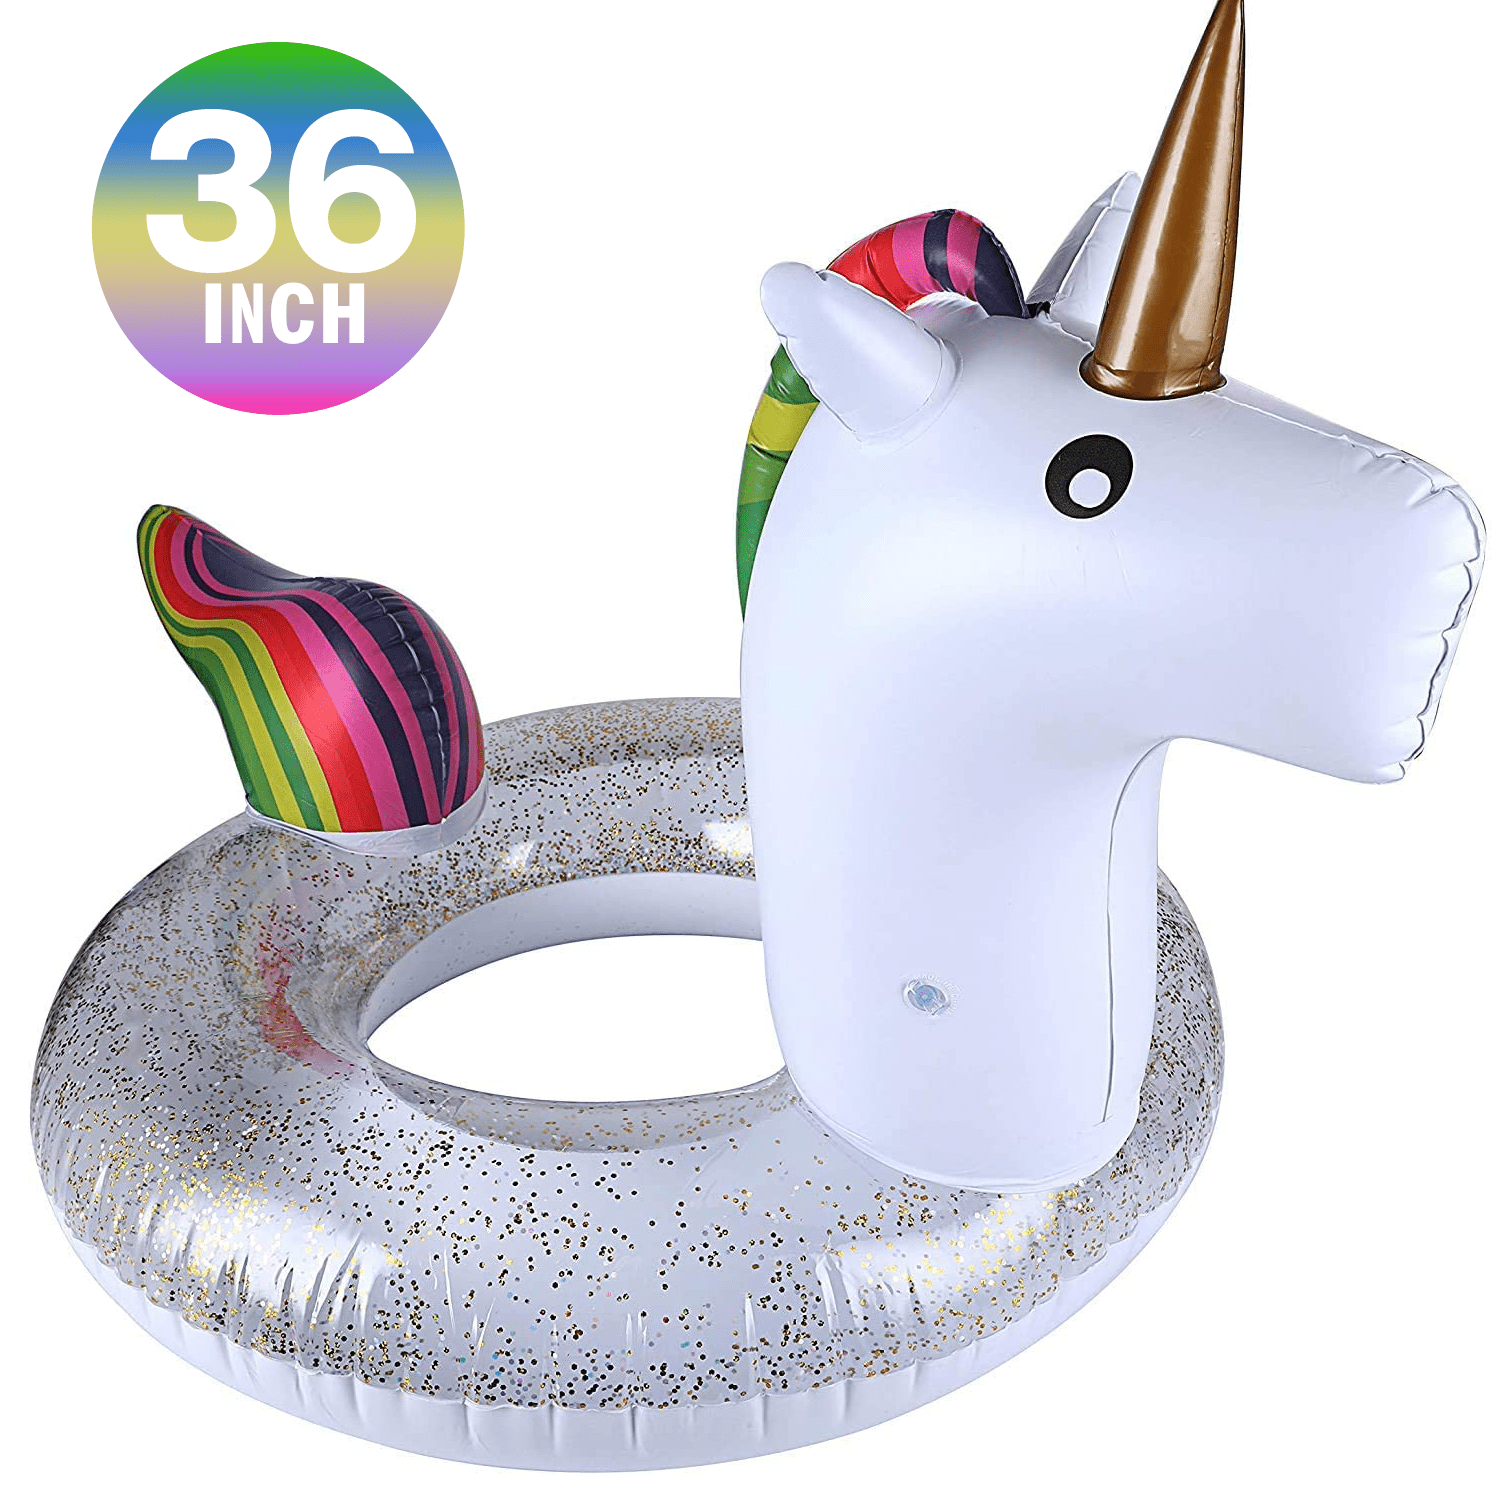 Inflatable Unicorn Pool Float Floatie Ride On with Fast Valves Large Rideable Blow Up Summer Beach Swimming Pool Party Lounge Raft Decorations Toys Kids Adults (36 inch)